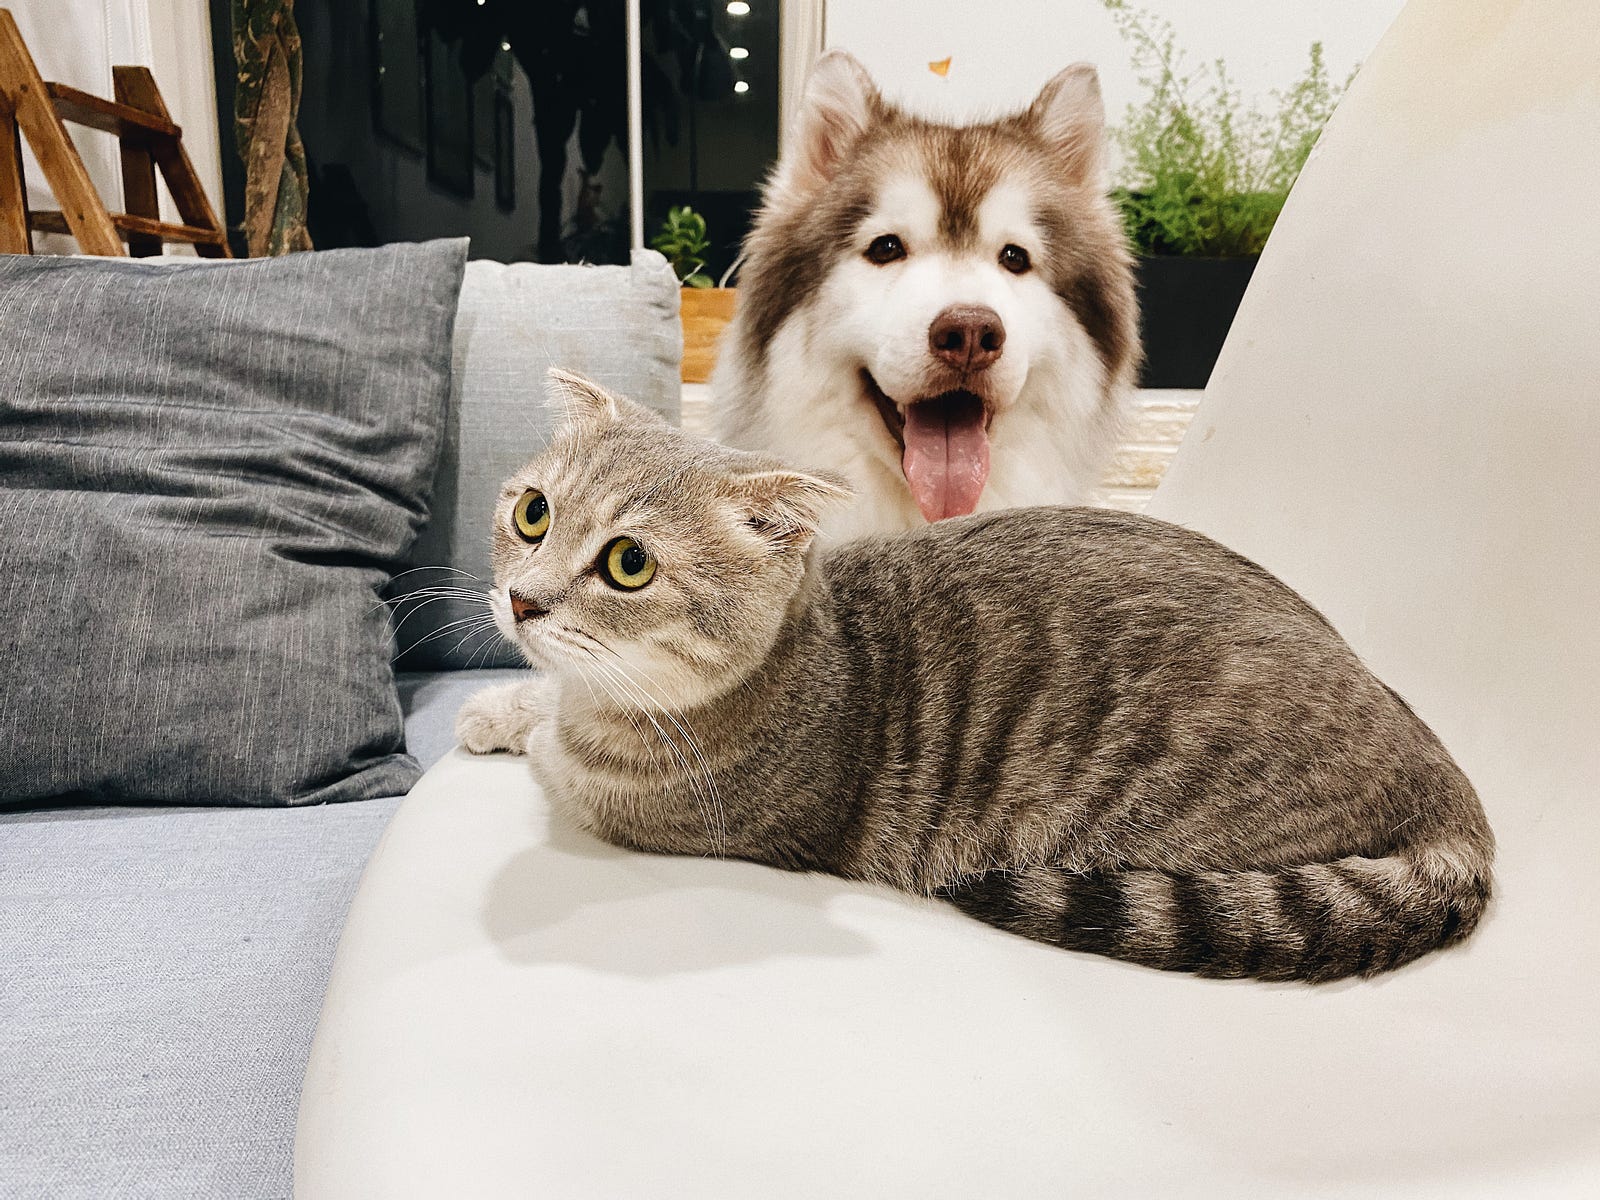 A tiger cat is perched (facing left) in the foreground, with a facing-forward dog in the background. The dog is a young husky. Both are on a low sofa.